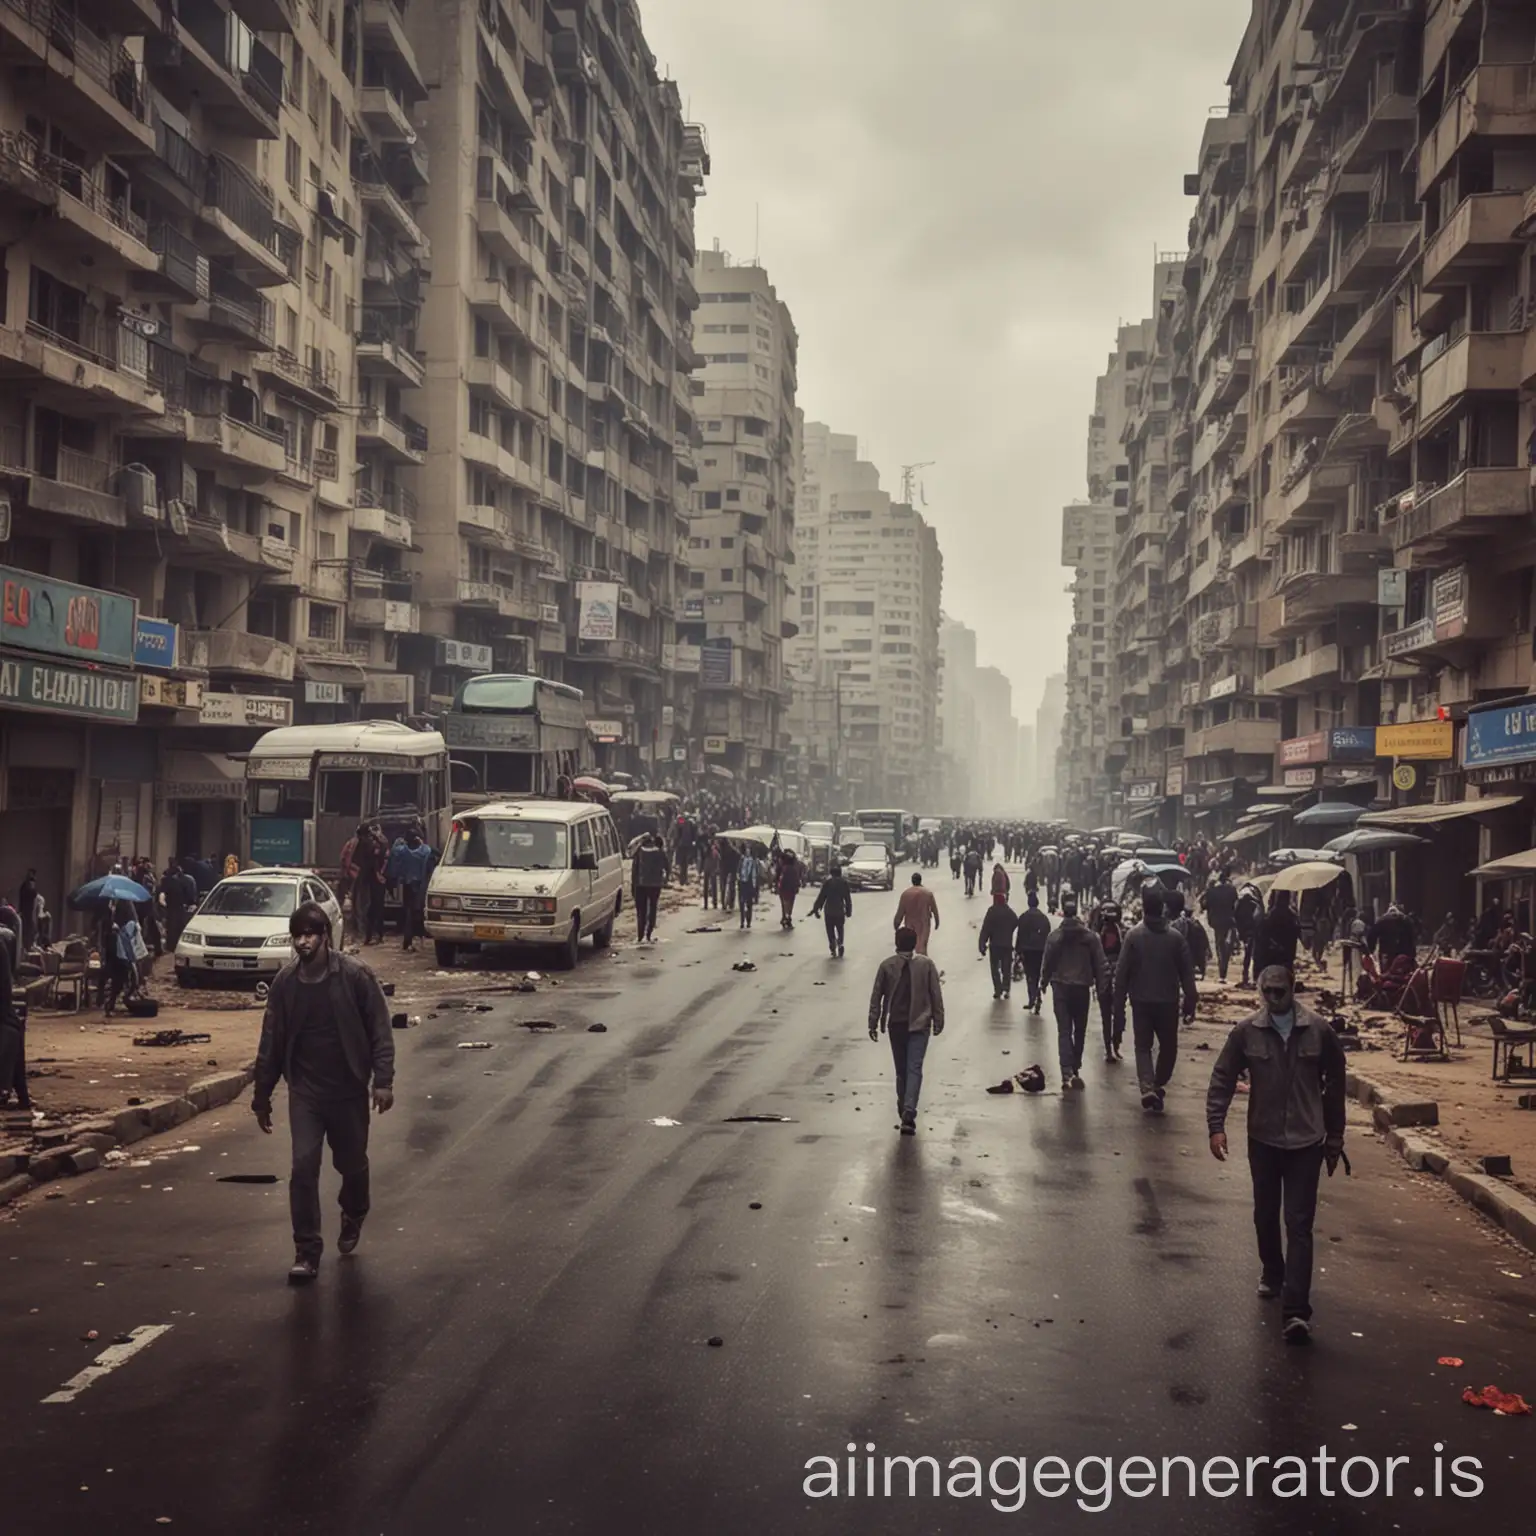 show me a zombie apocalypse in Cairo with grey cloudy weather